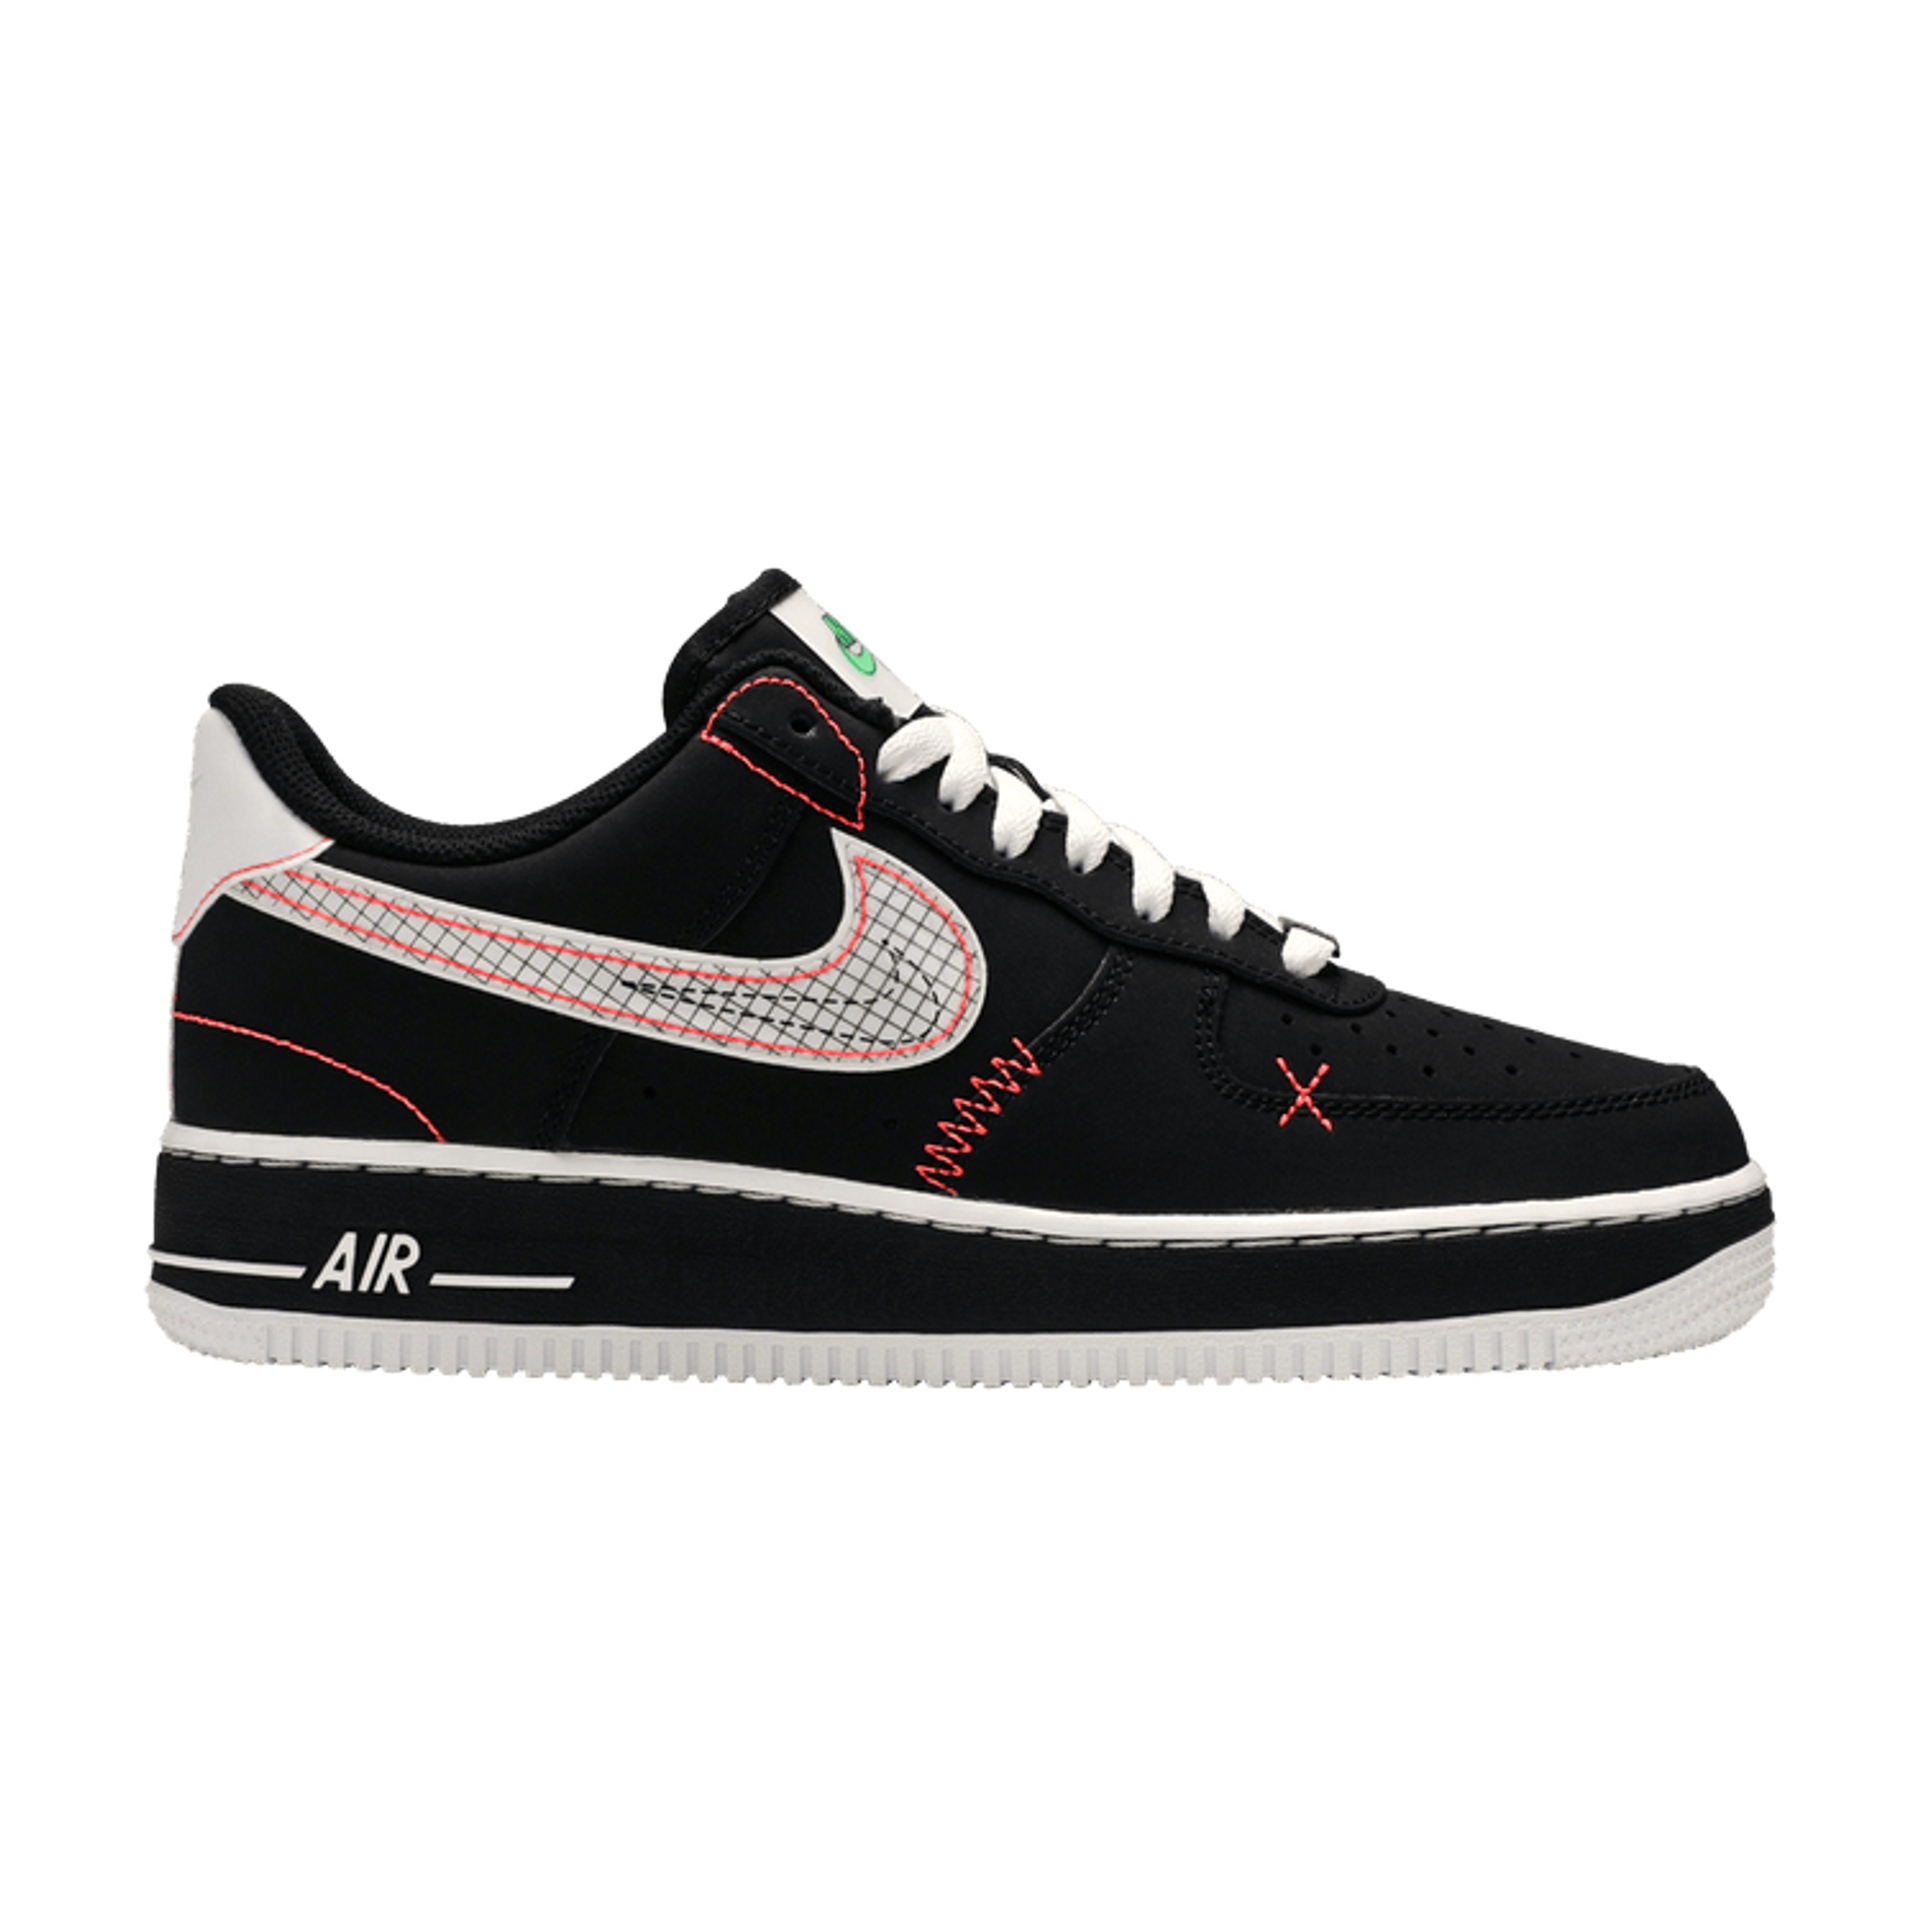 Nike Air Force 1 '07 LV8 'Exposed Stitching'